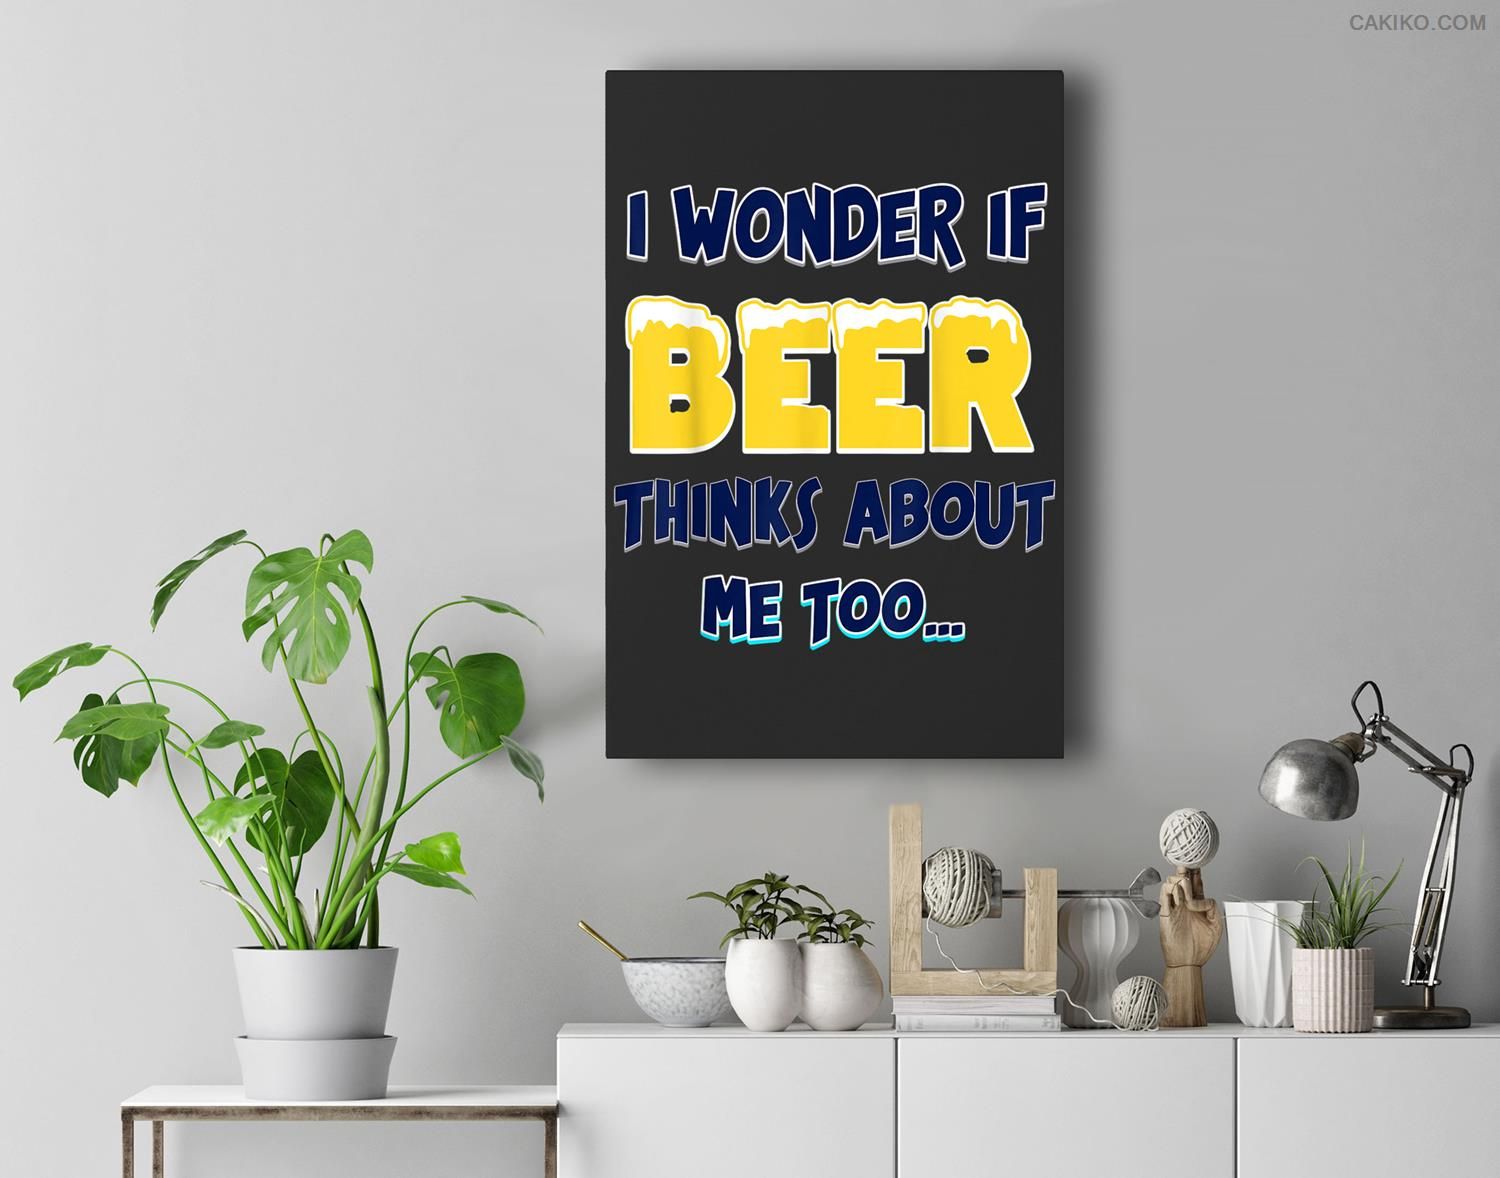 I Wonder If Beer Thinks About Me Too Premium Wall Art Canvas Decor